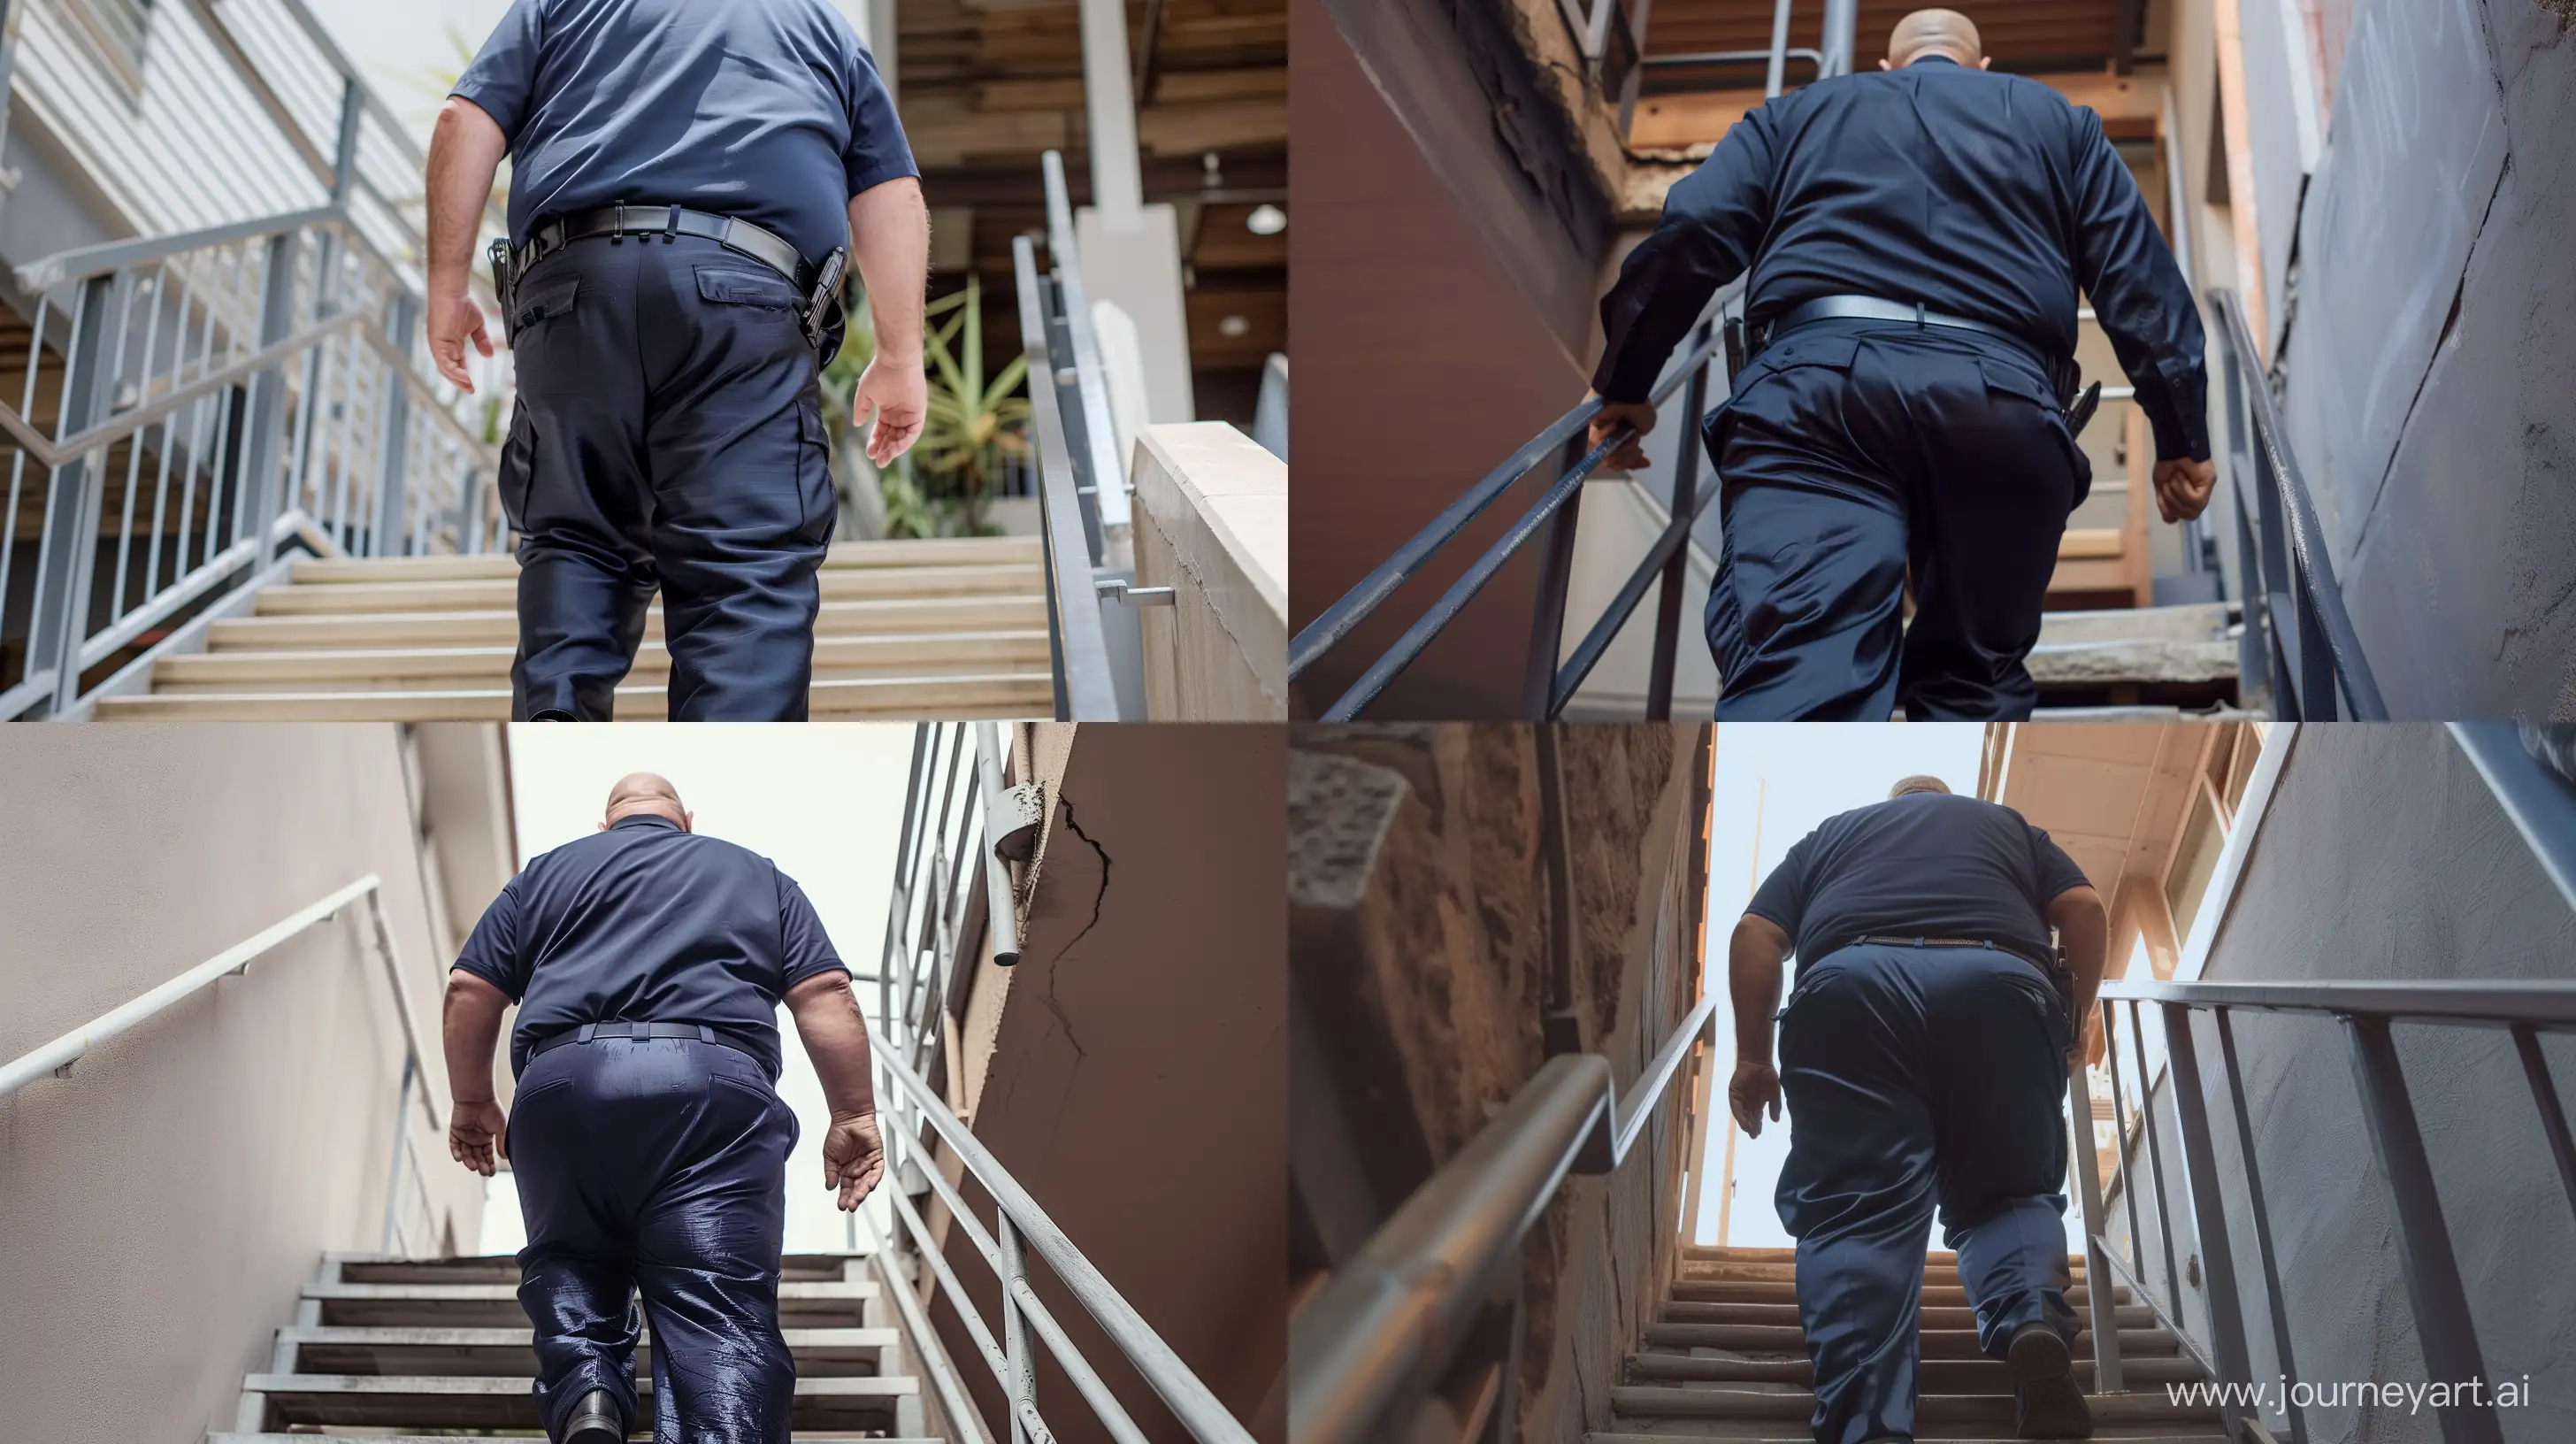 Elderly-Security-Guard-Ascending-Stairs-in-Navy-Attire